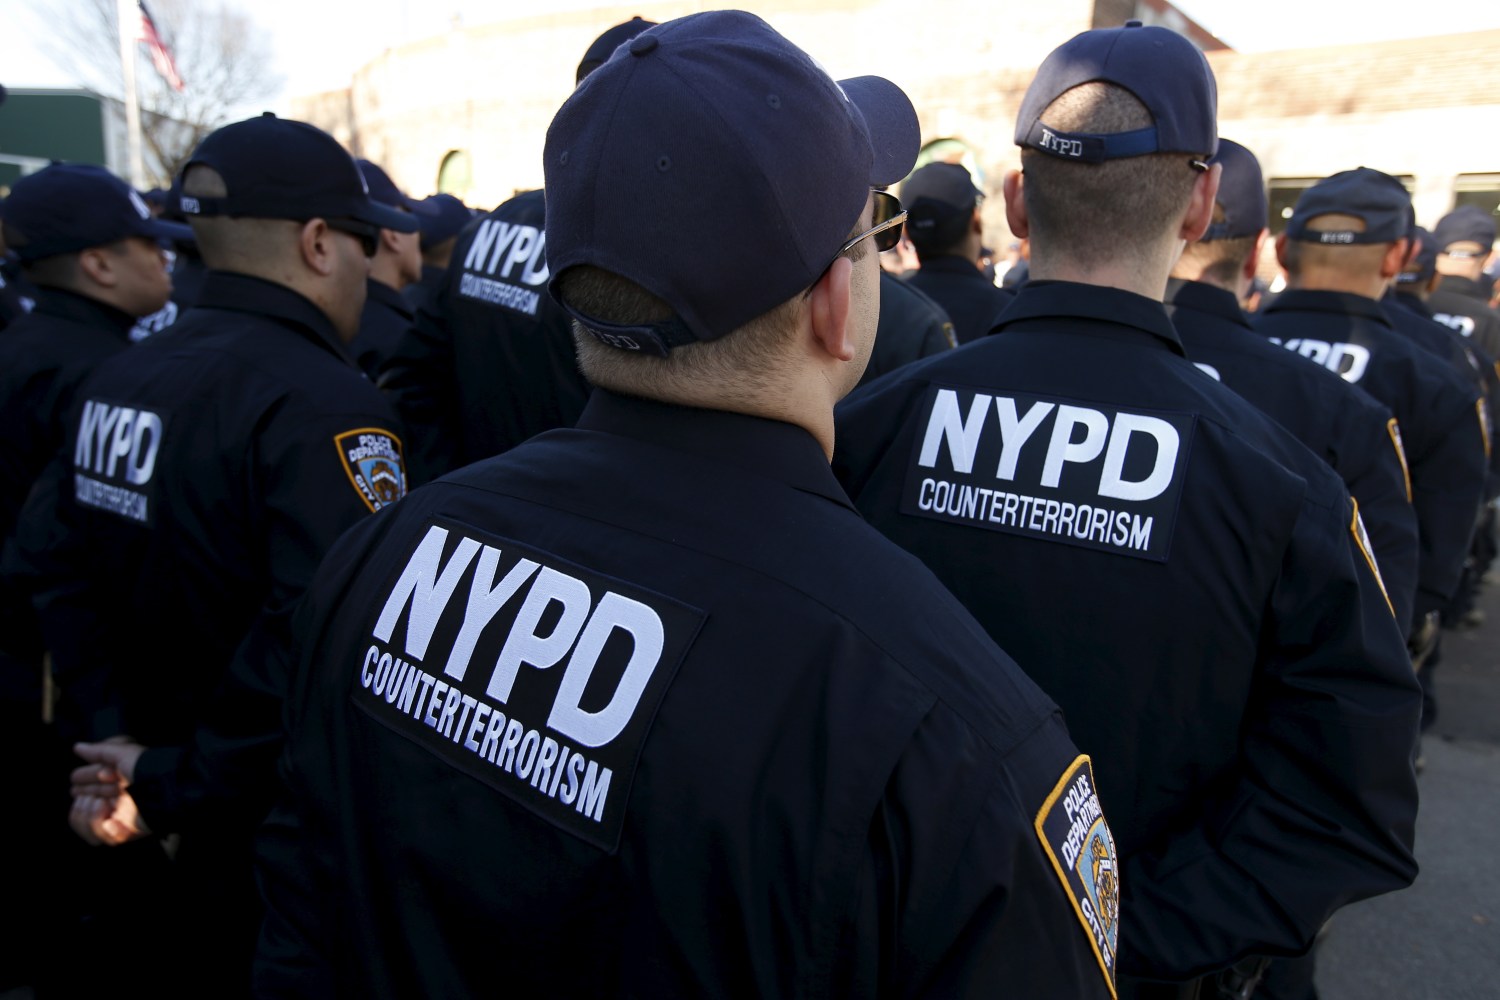 Members of the New York City Police Department (NYPD) newly formed Critical Response Command anti-terrorism unit stand in formation as they gather for their first deployment outside their headquarters on Randall's Island in New York City, November 16, 2015. New York City Police Commissioner Bill Bratton deployed a new counterterrorism team on Monday, three days after the deadly attacks in Paris by militants he says will likely target his city next. REUTERS/Mike Segar - RTS7GB2